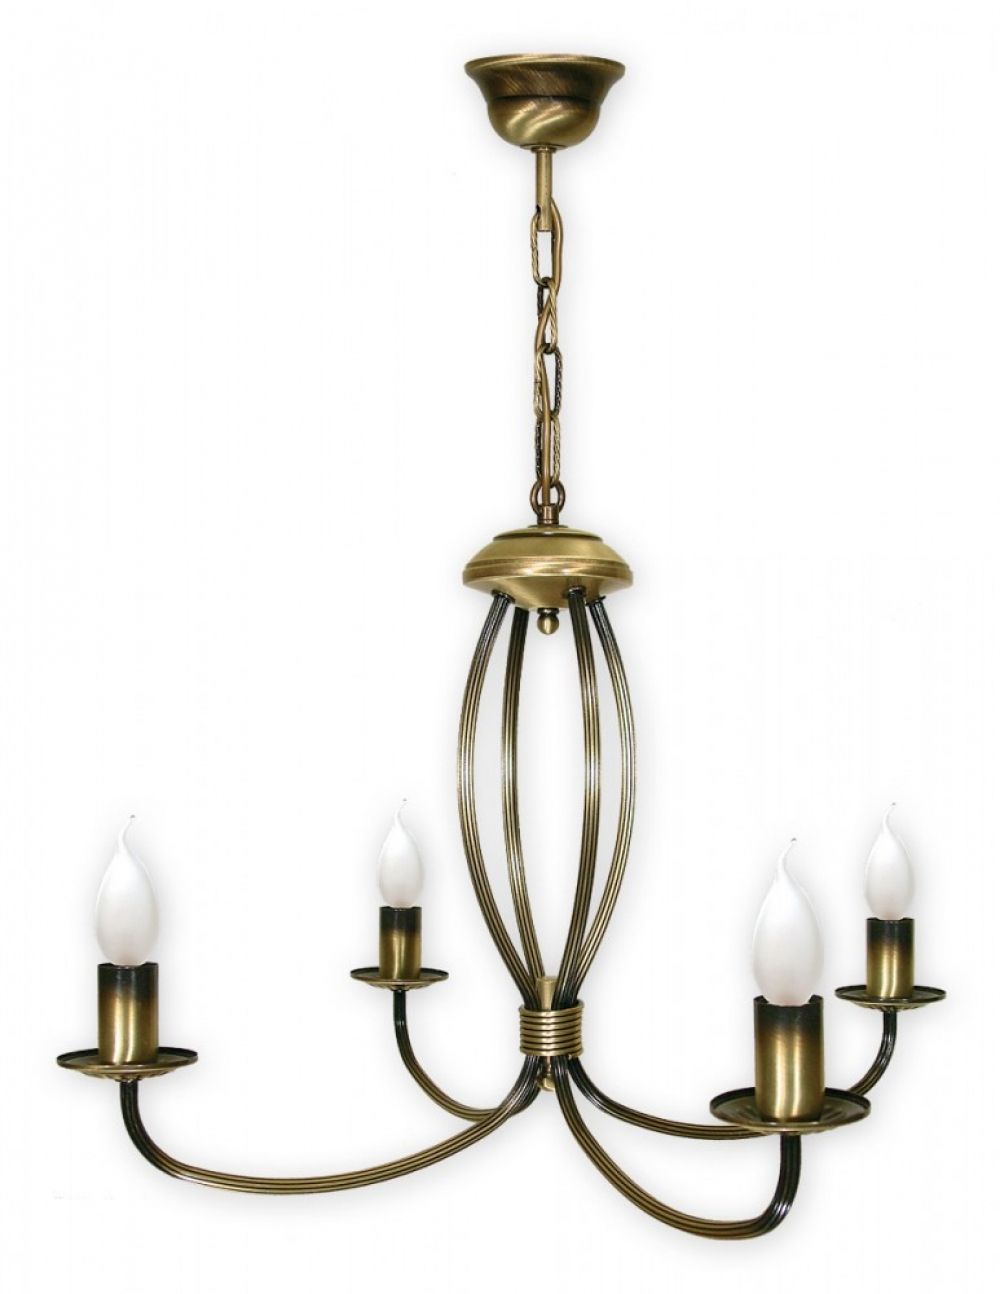 Details About Chandalier 4 Arms Traditional Ceiling Light – Brass Finish –  Corona Pendant Lamp For Corona 12 Light Sputnik Chandeliers (View 14 of 30)